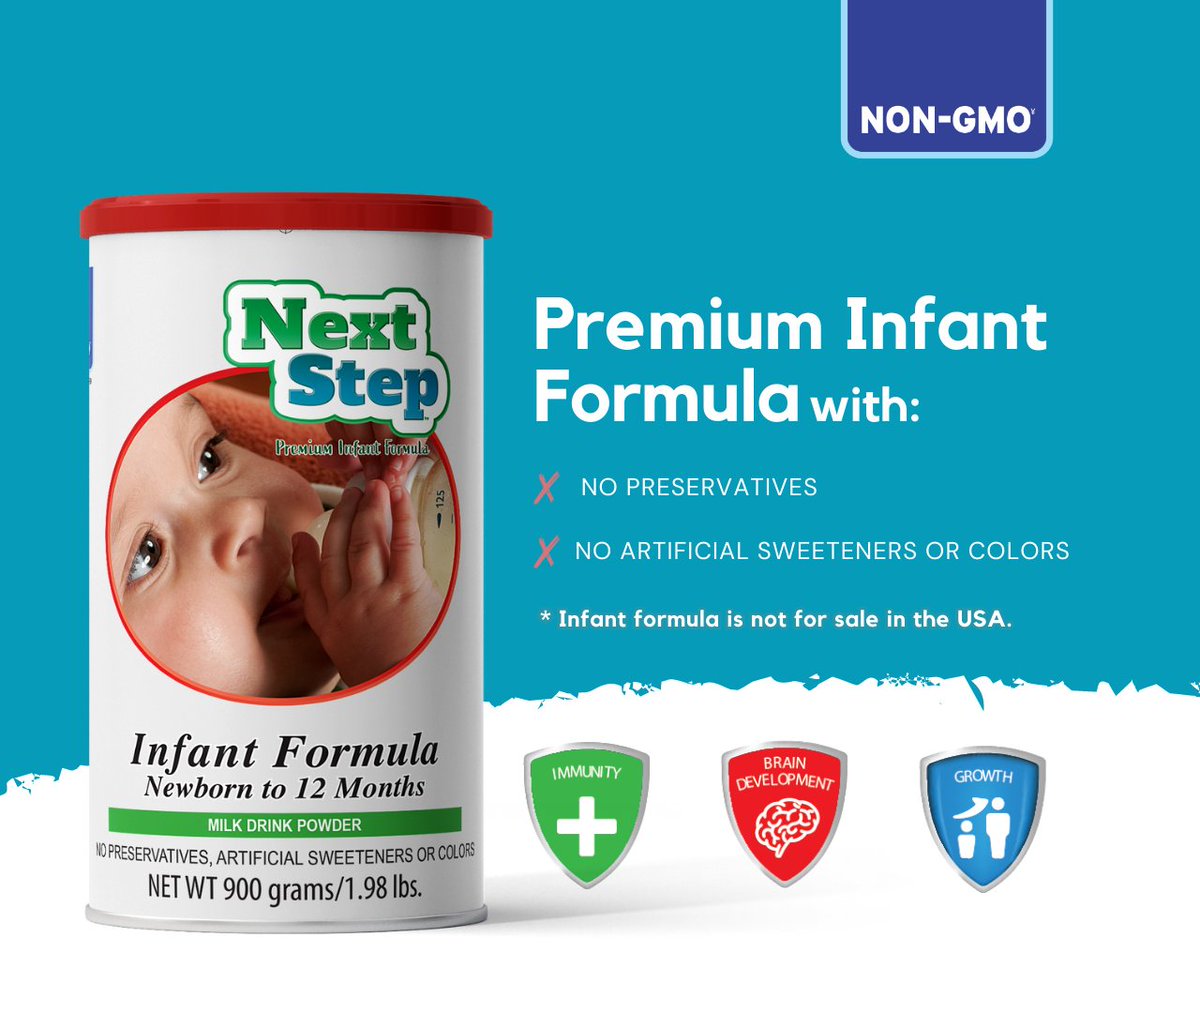 Give your baby the best start with NextStepFormula.com! Our non-GMO infant formula is designed to support healthy growth. #NextStepFormula